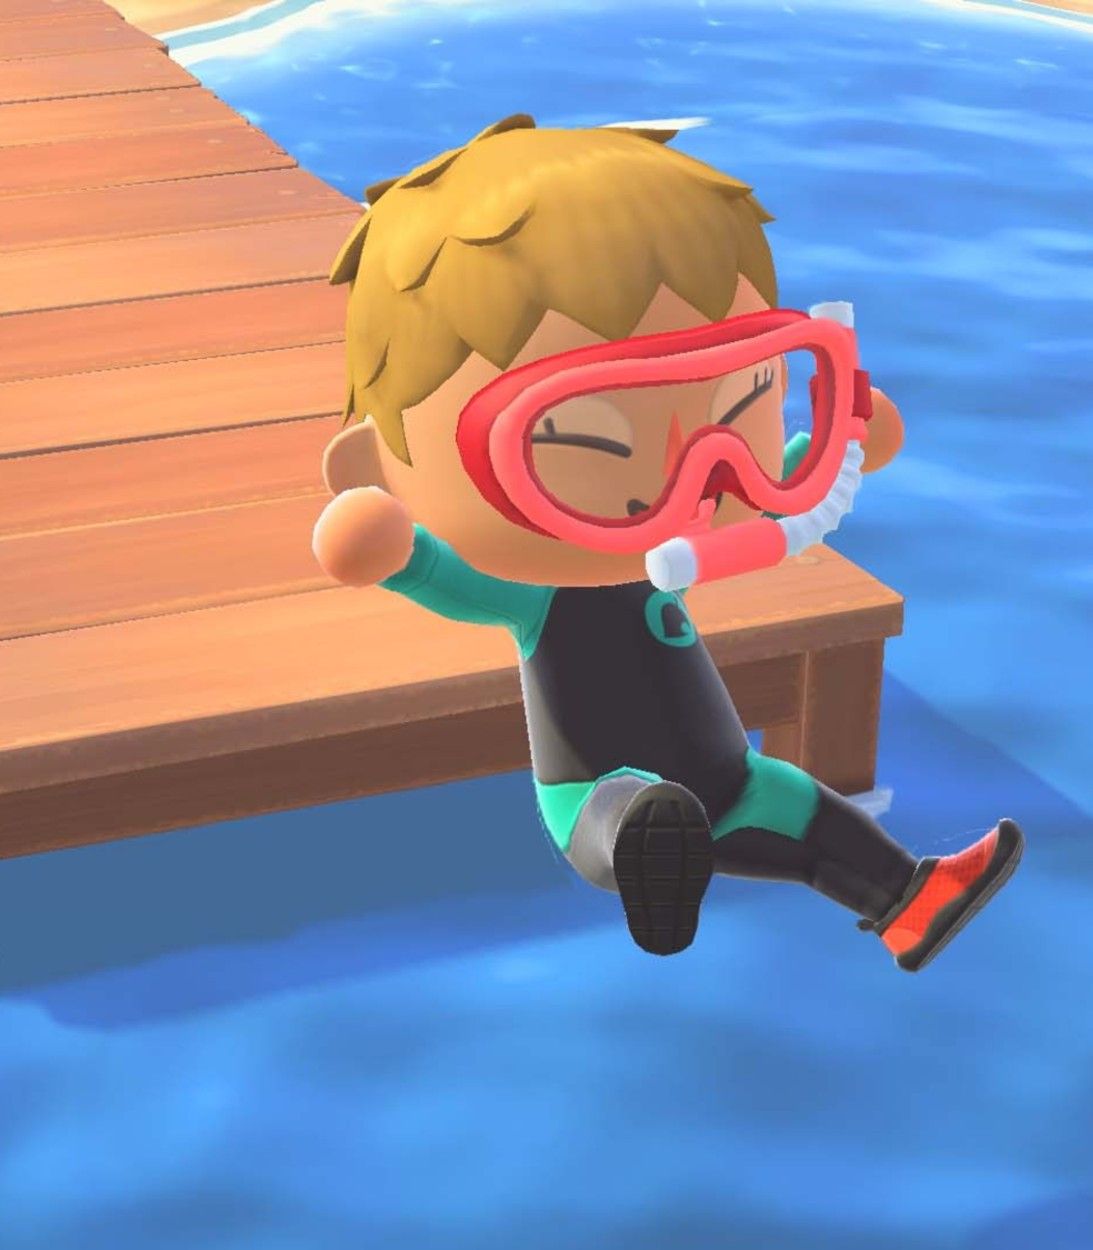 A player in a snorkel and wetsuit dives off the pier into the ocean in Animal Crossing: New Horizons